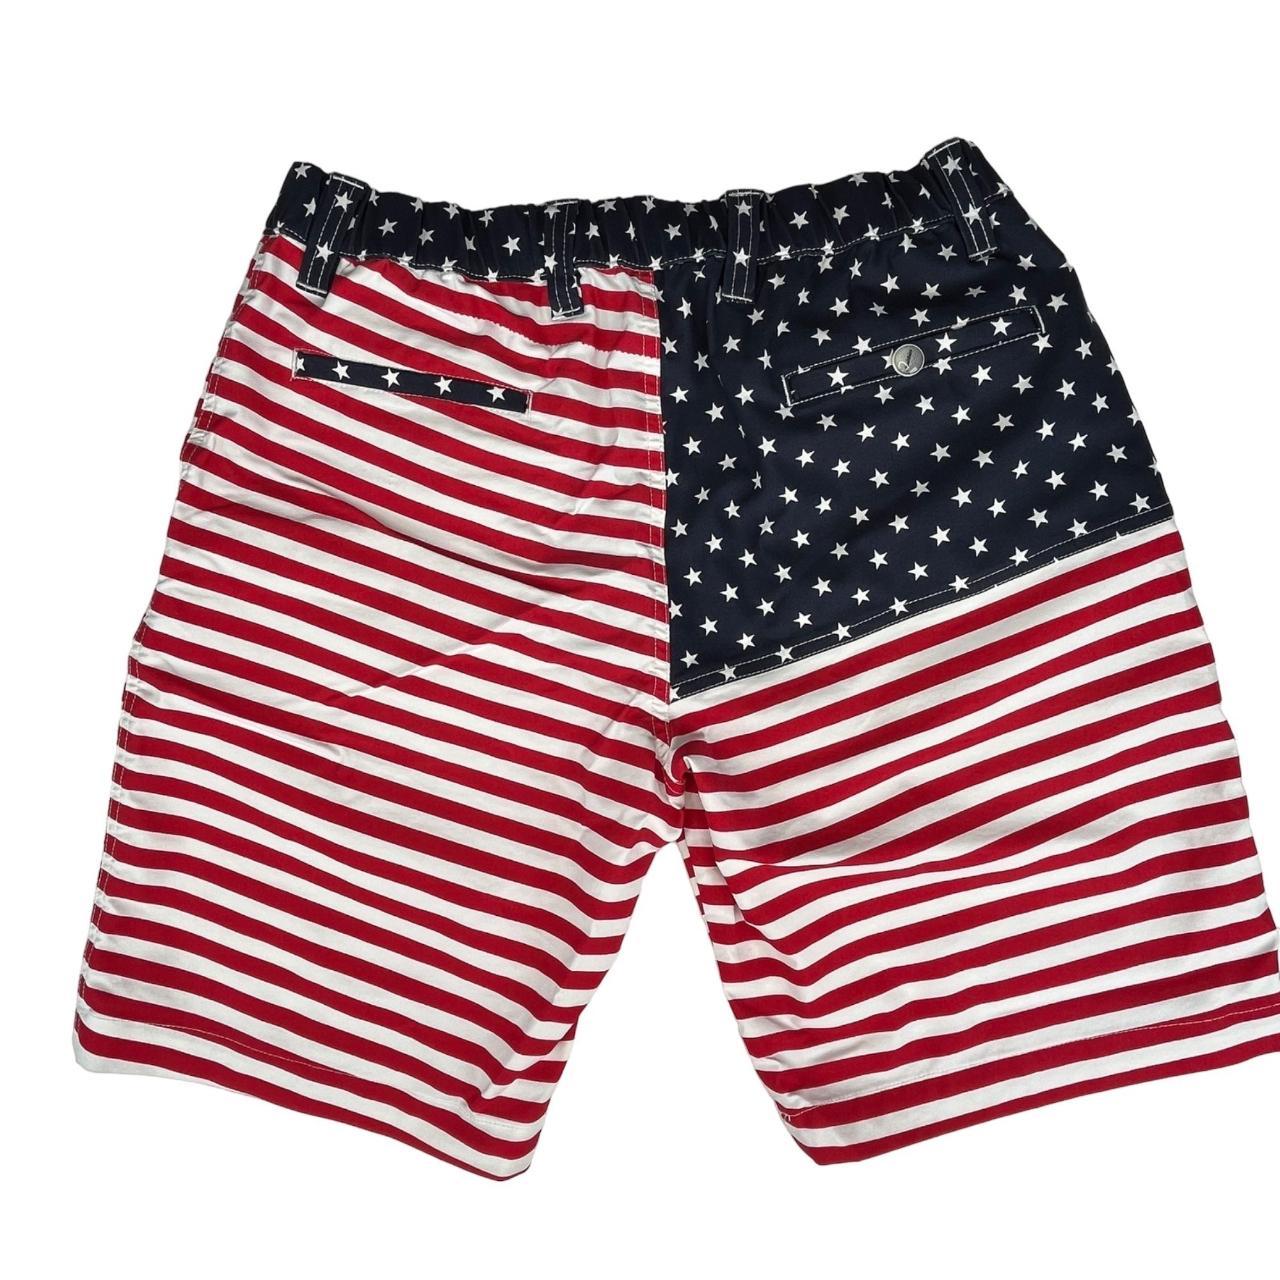 Chubbies Men's Blue and Red Shorts | Depop